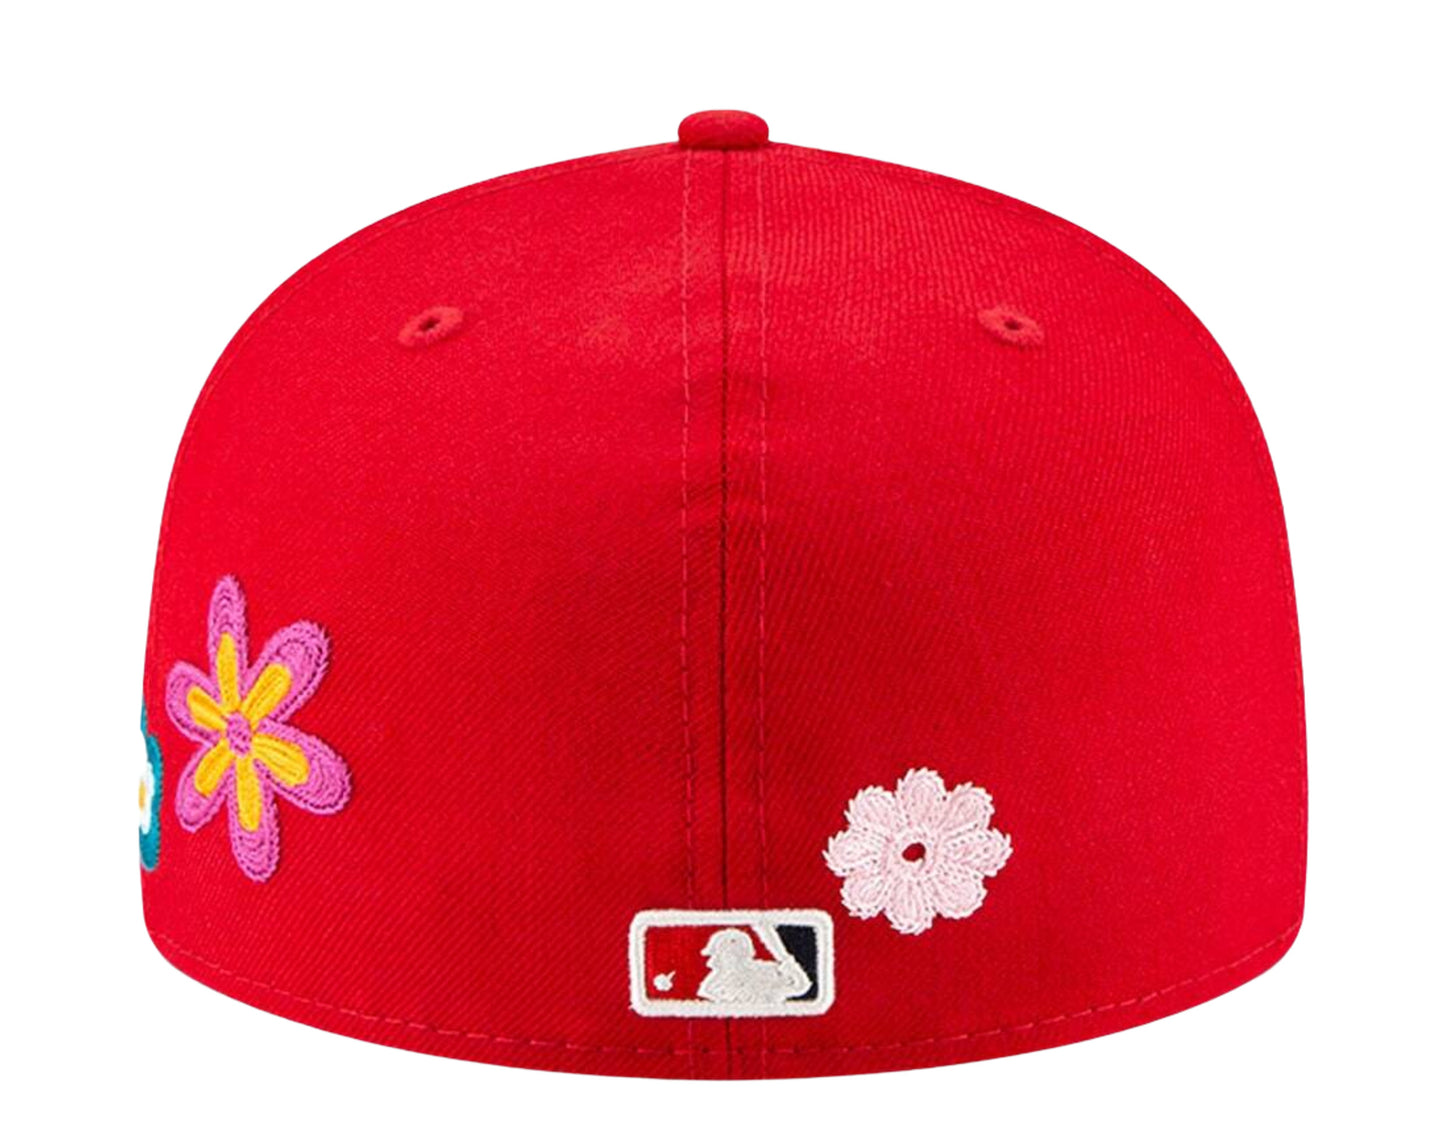 New Era 59Fifty MLB Washington Nationals Chain Stitch Floral Fitted Hat W/ Pink Undervisor